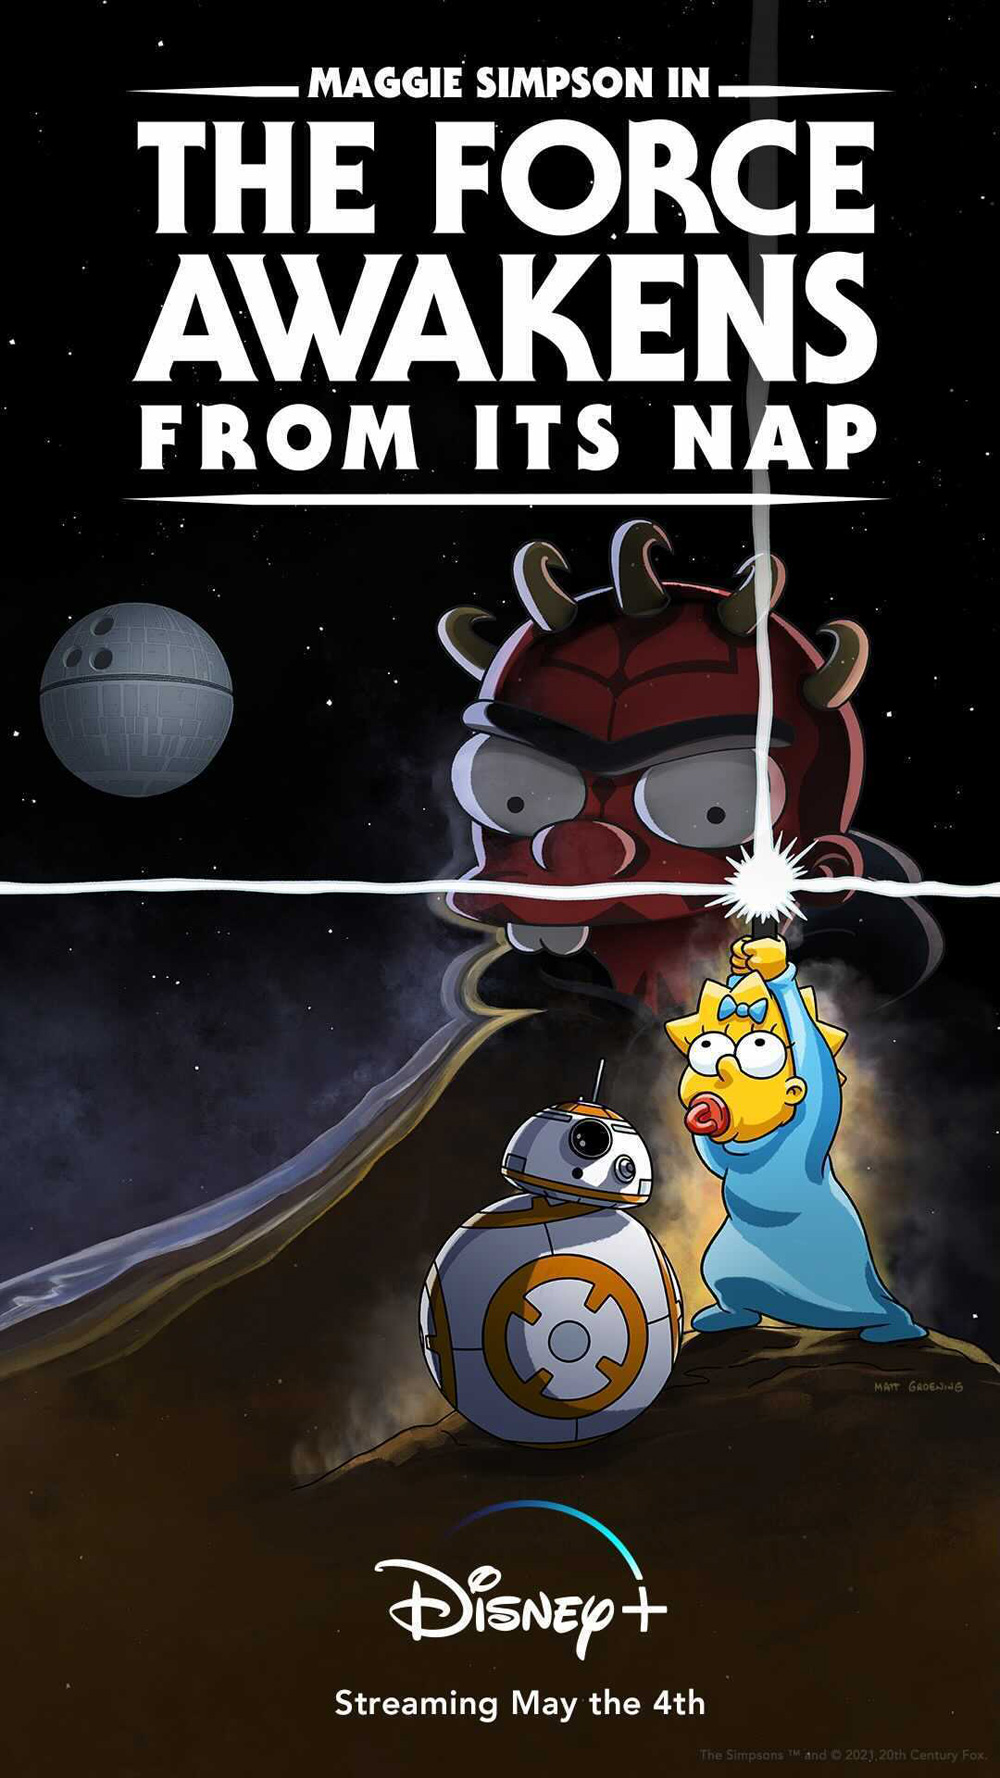 Maggie Simpson in 'The Force Awakens From Its Nap'